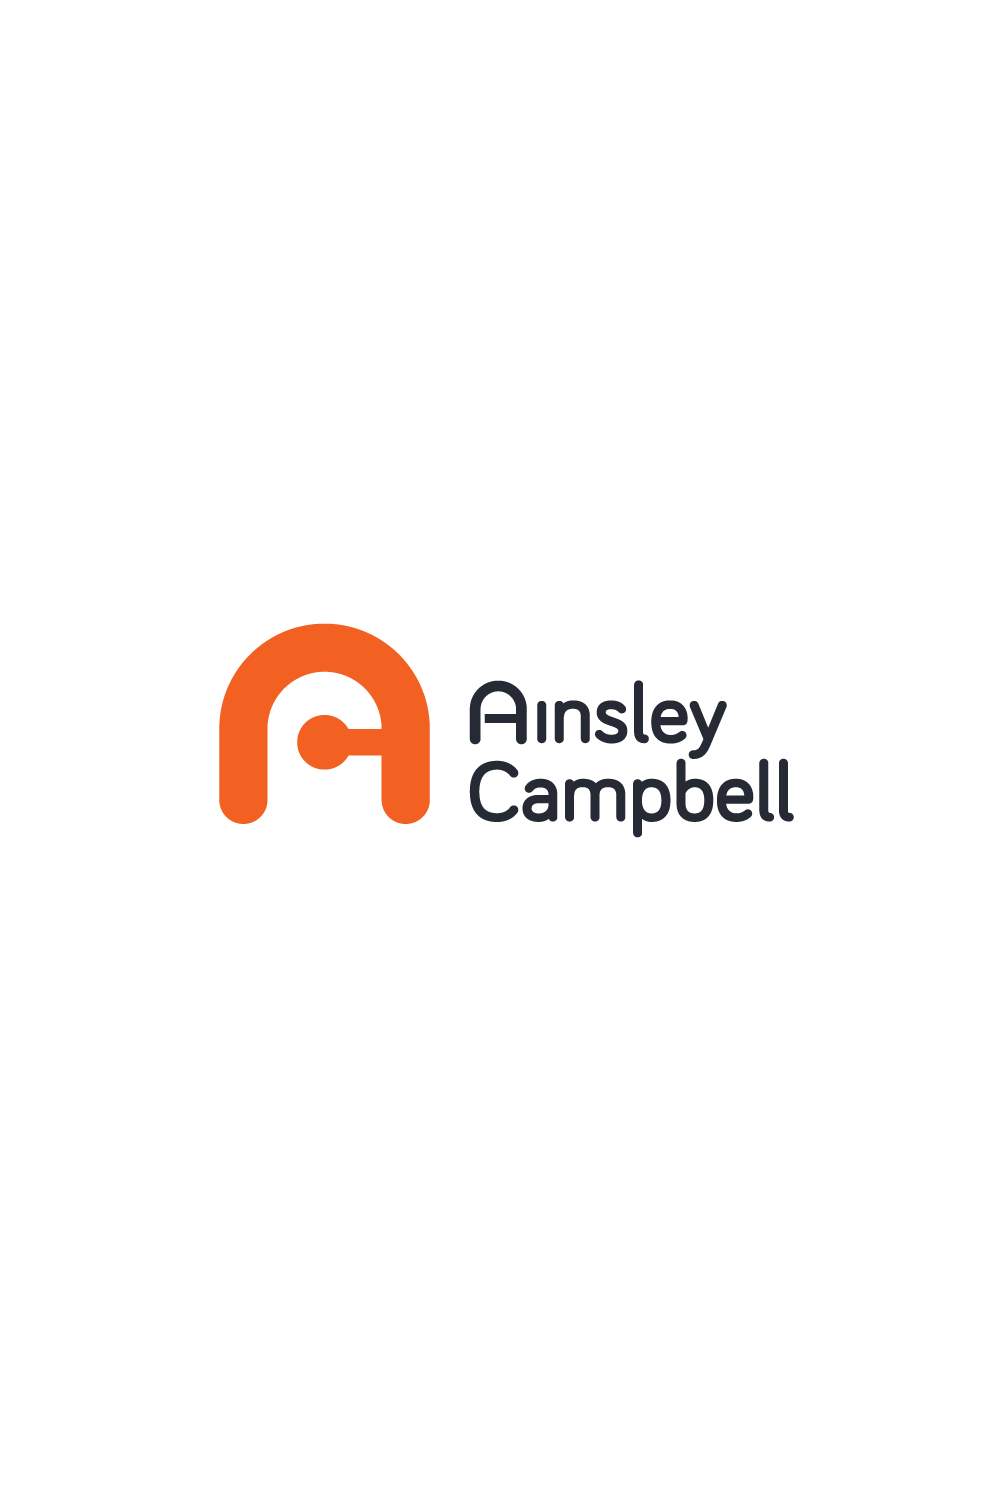 Ainsley Campbell